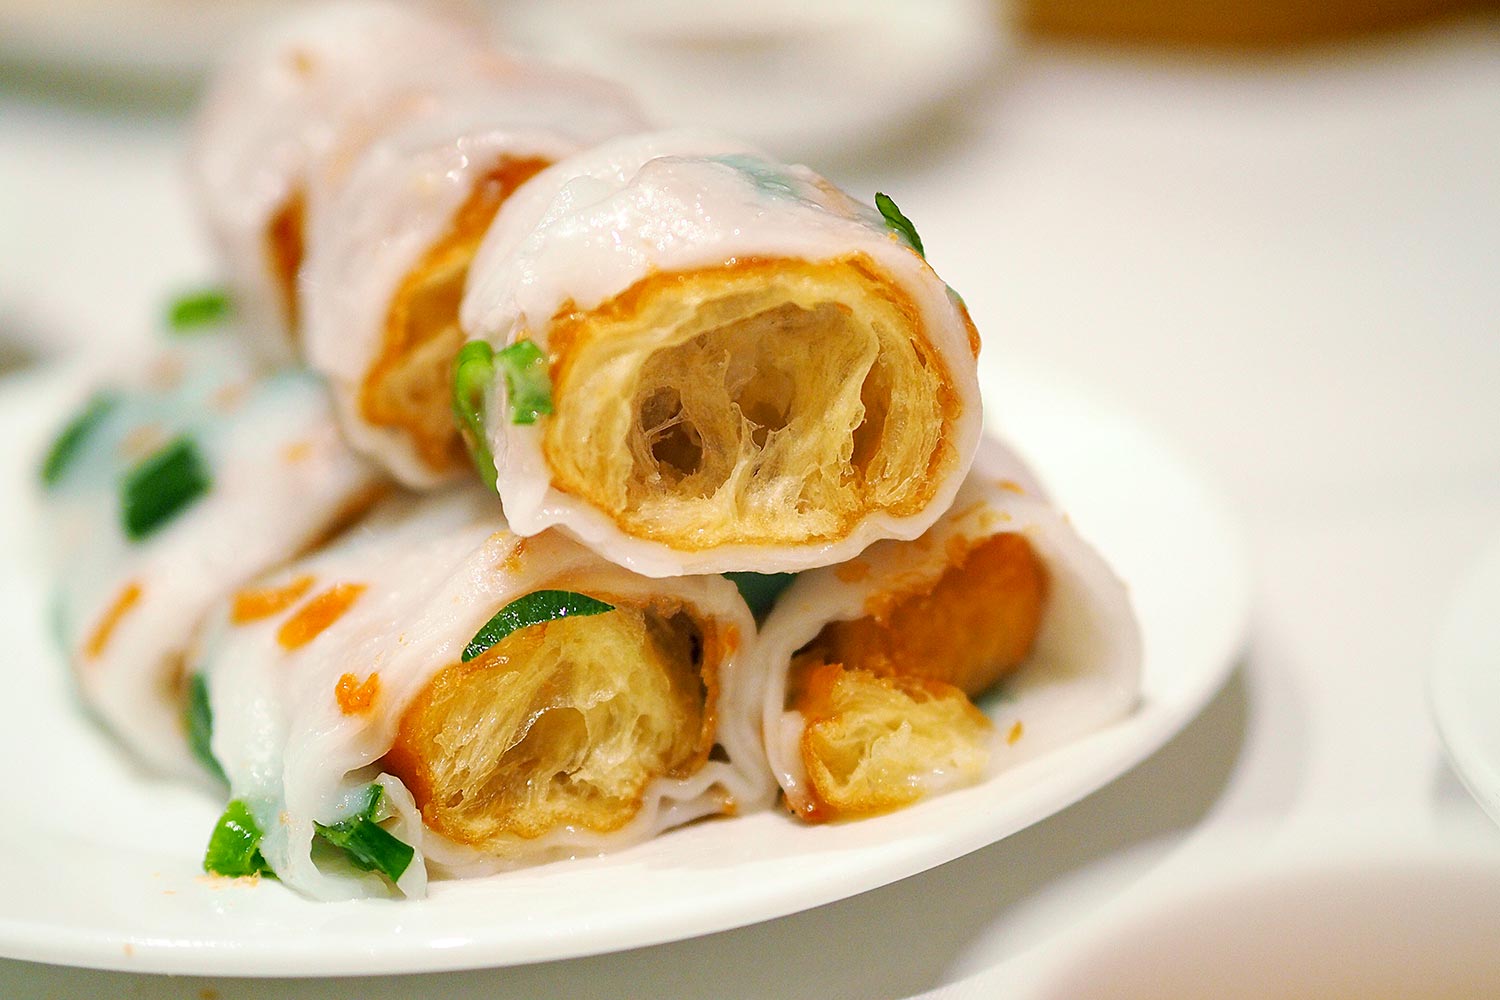 Sydney Food Blog Review of East Ocean, Haymarket: Rice Noodle Rolls with Chinese Dough Sticks